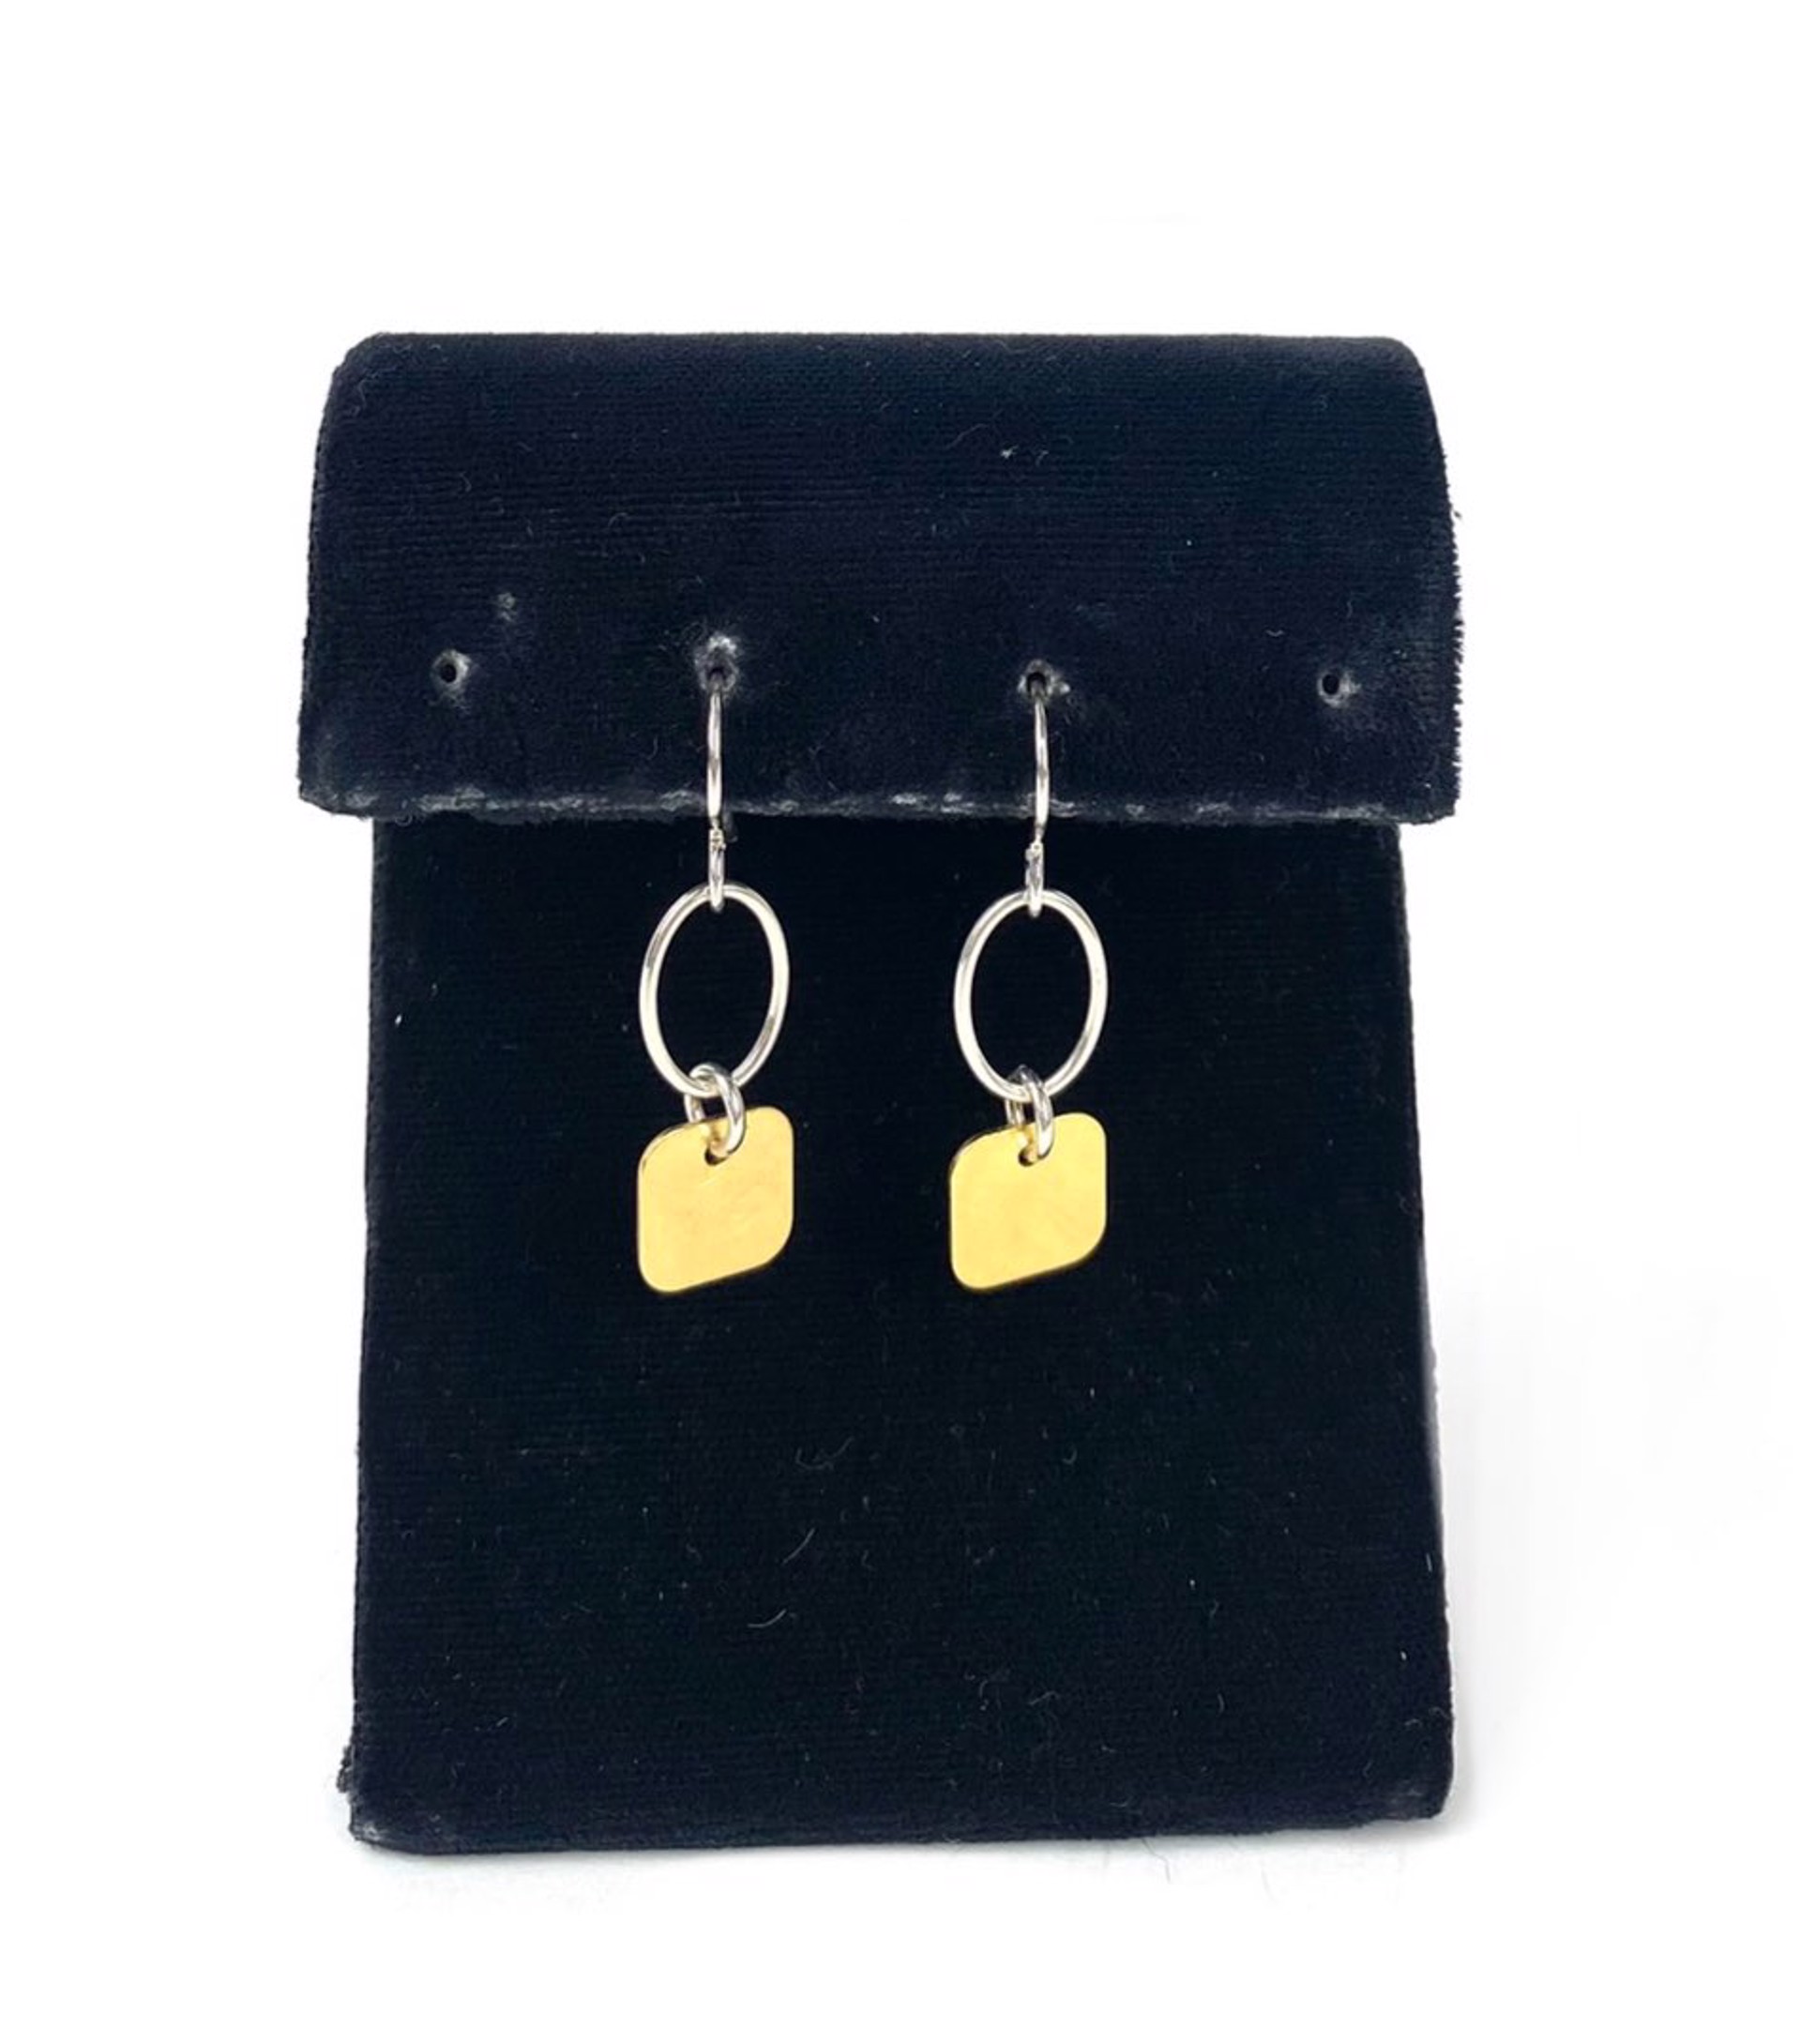 Oval and Square Vermeil Earrings by Nichole Collins